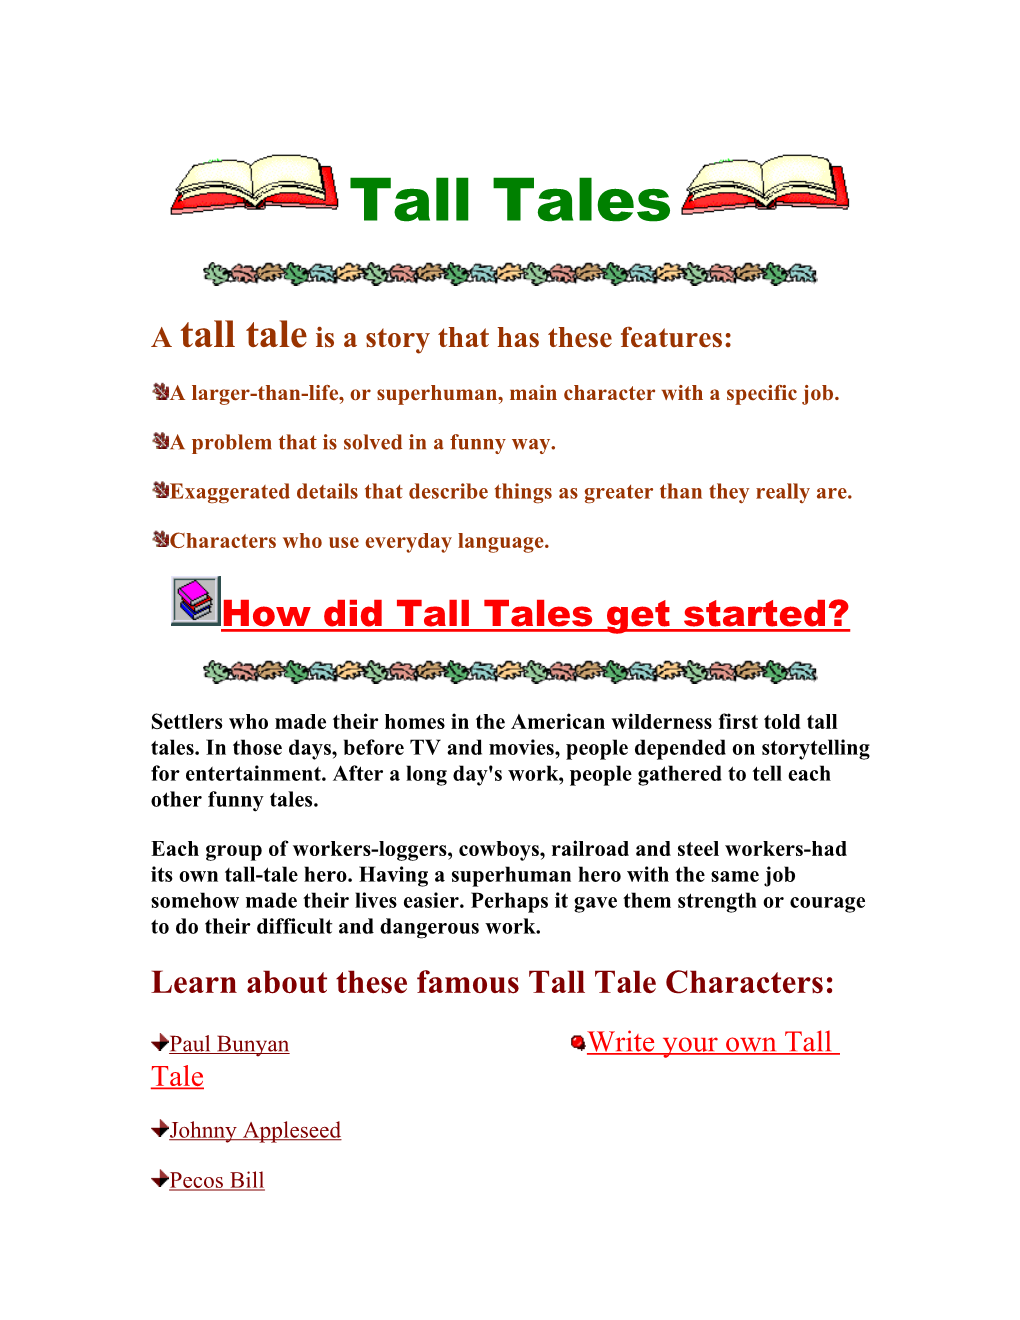 A Tall Tale Is a Story That Has These Features